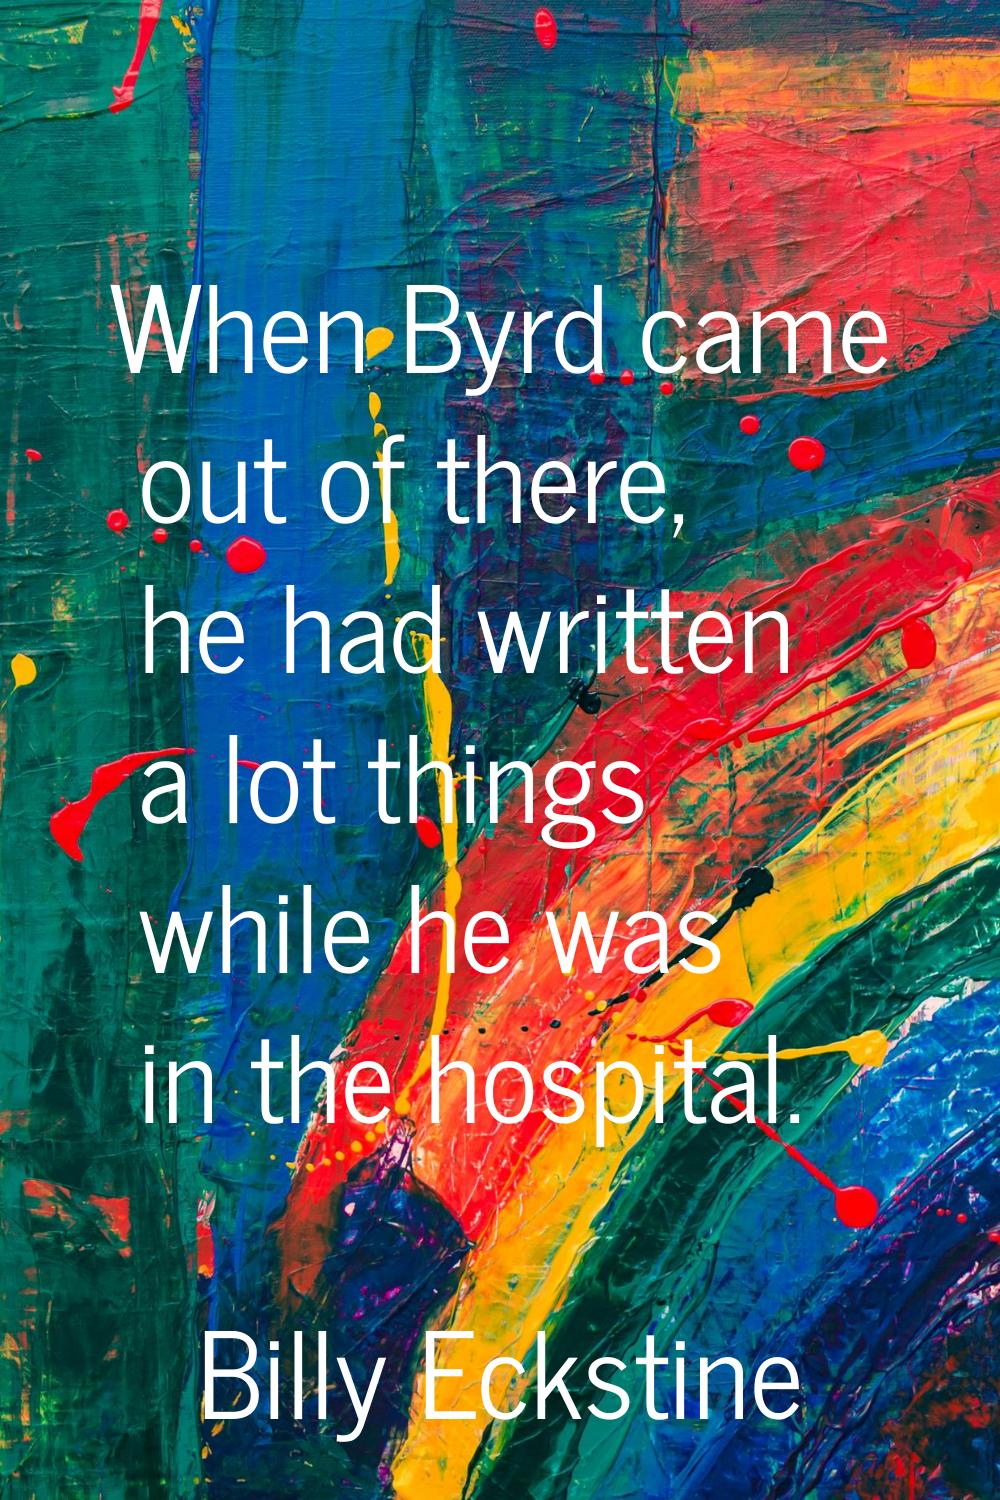 When Byrd came out of there, he had written a lot things while he was in the hospital.